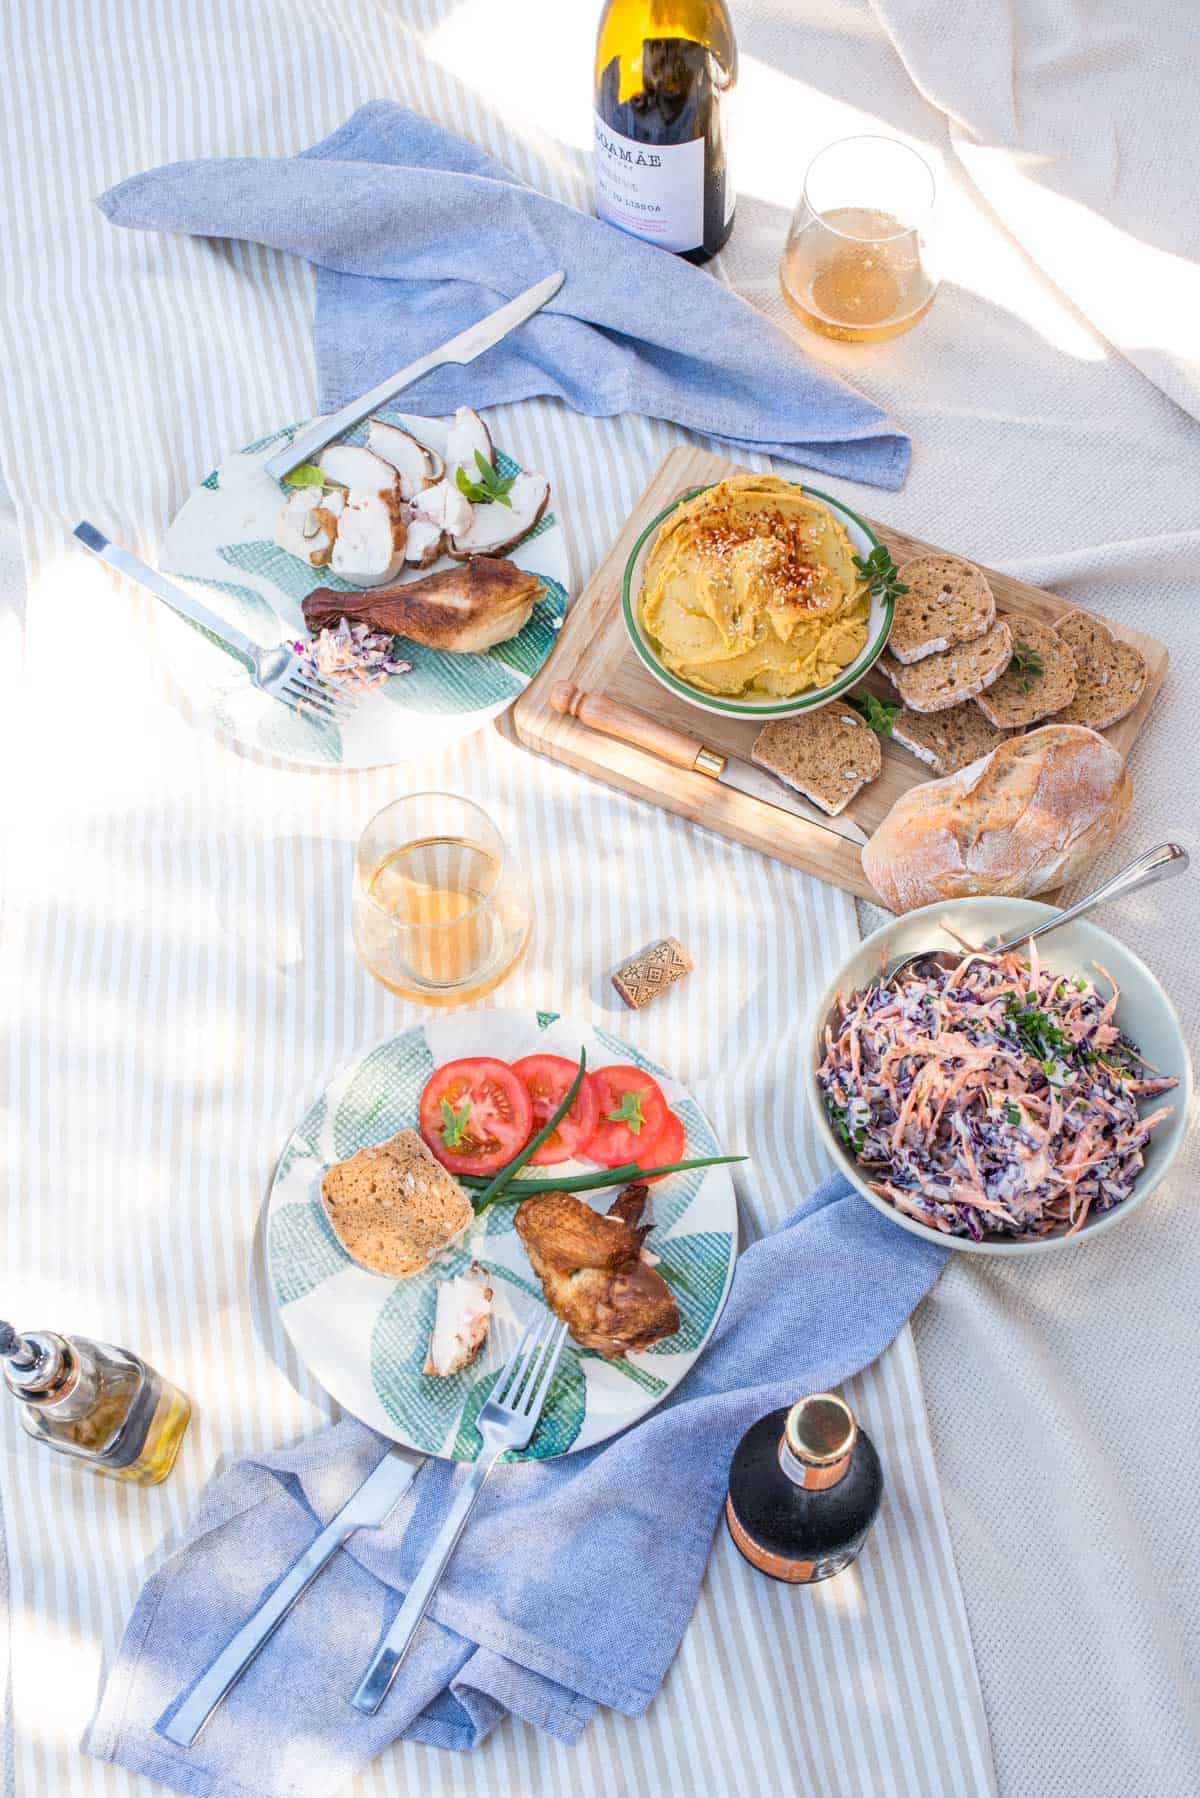 Summer picnic spread with chicken, hummus and coleslaw.